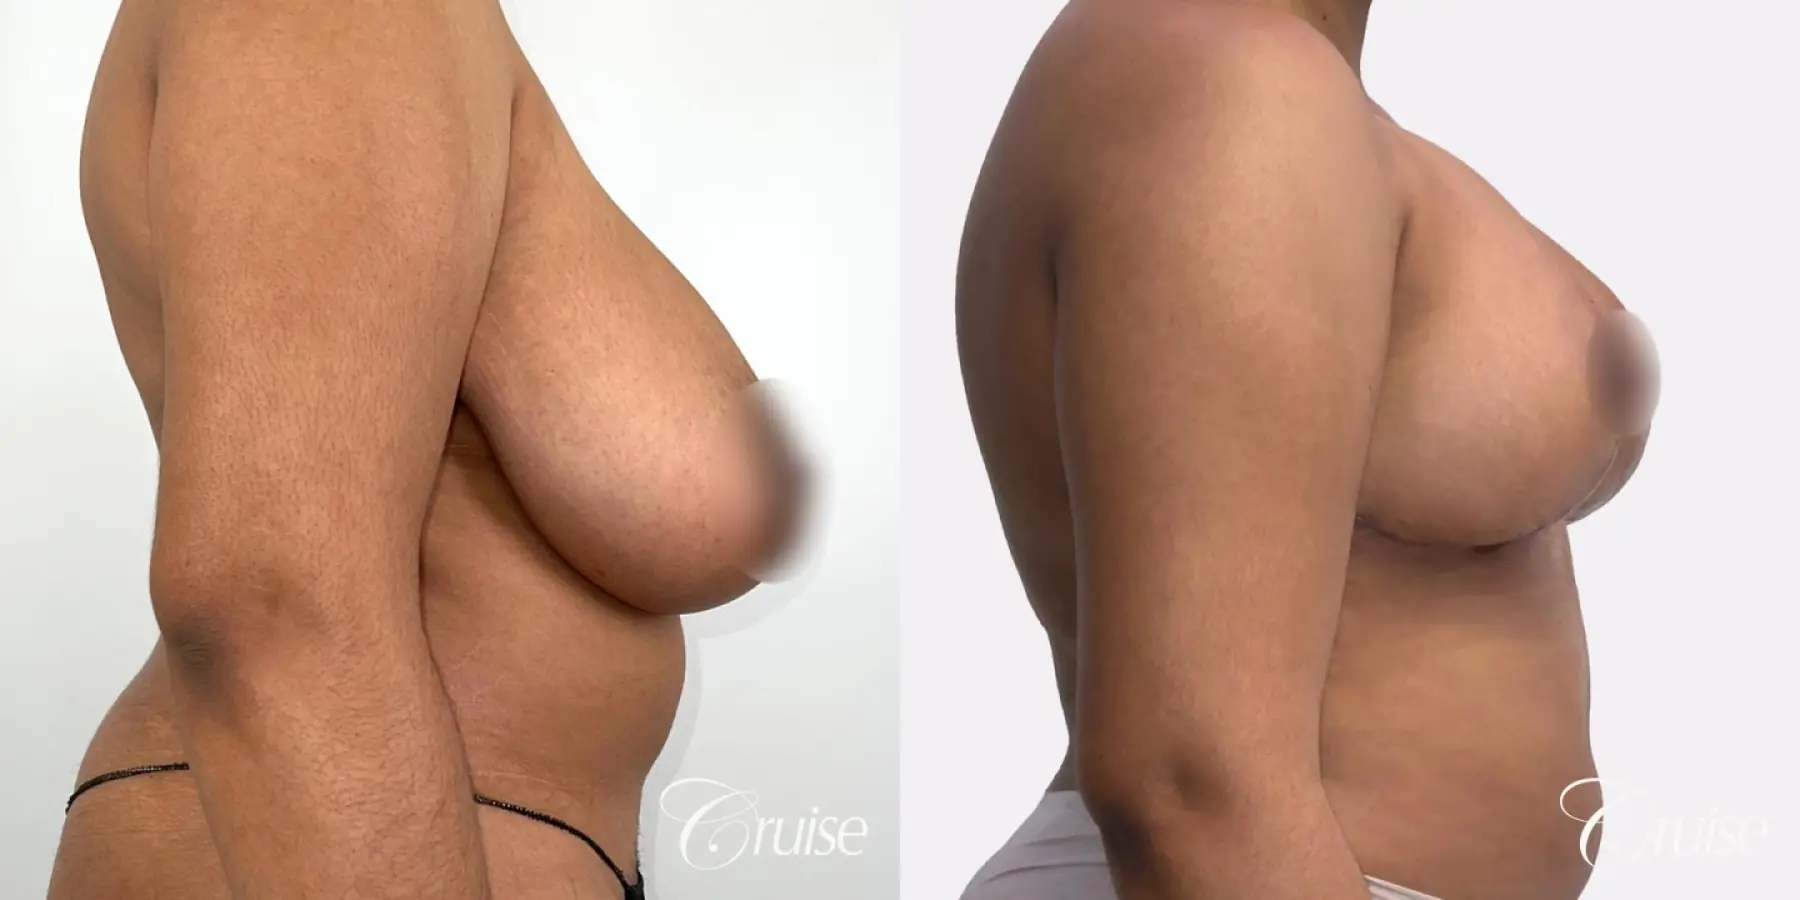 Breast Reduction & Breast Lift - Before and After 3